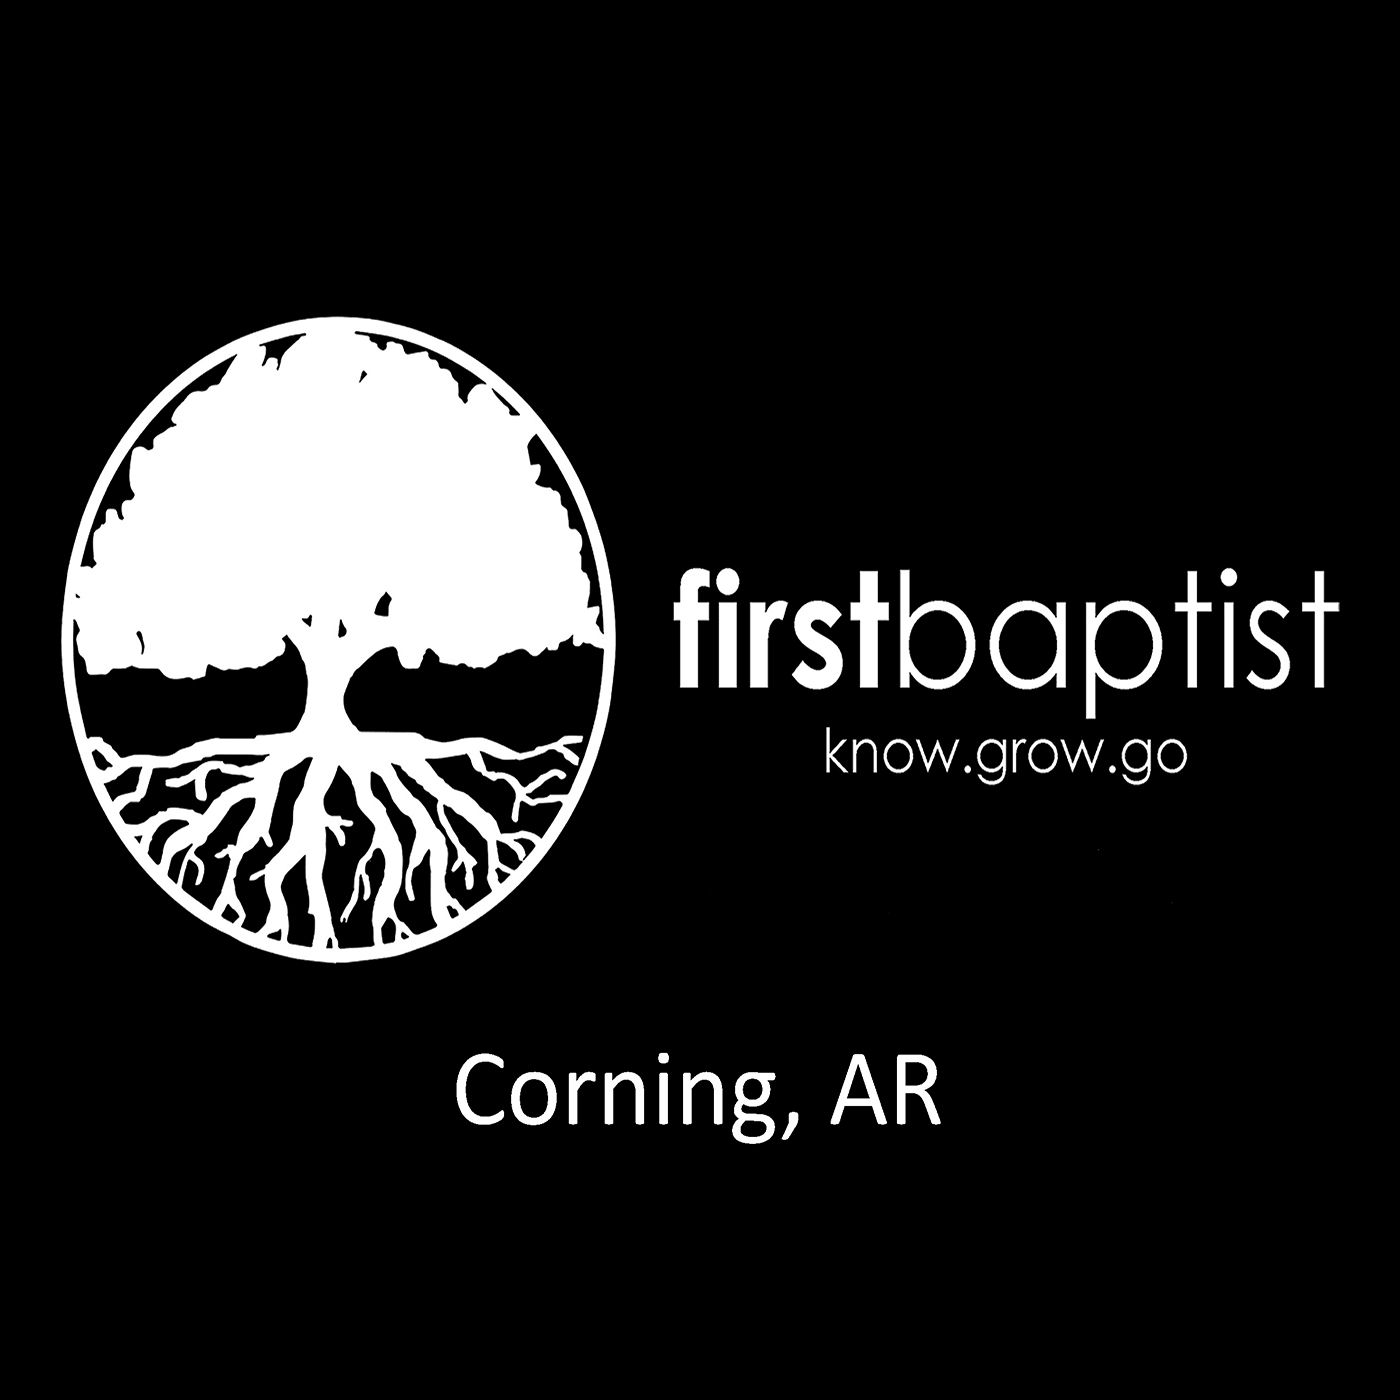 First Baptist Messages and more